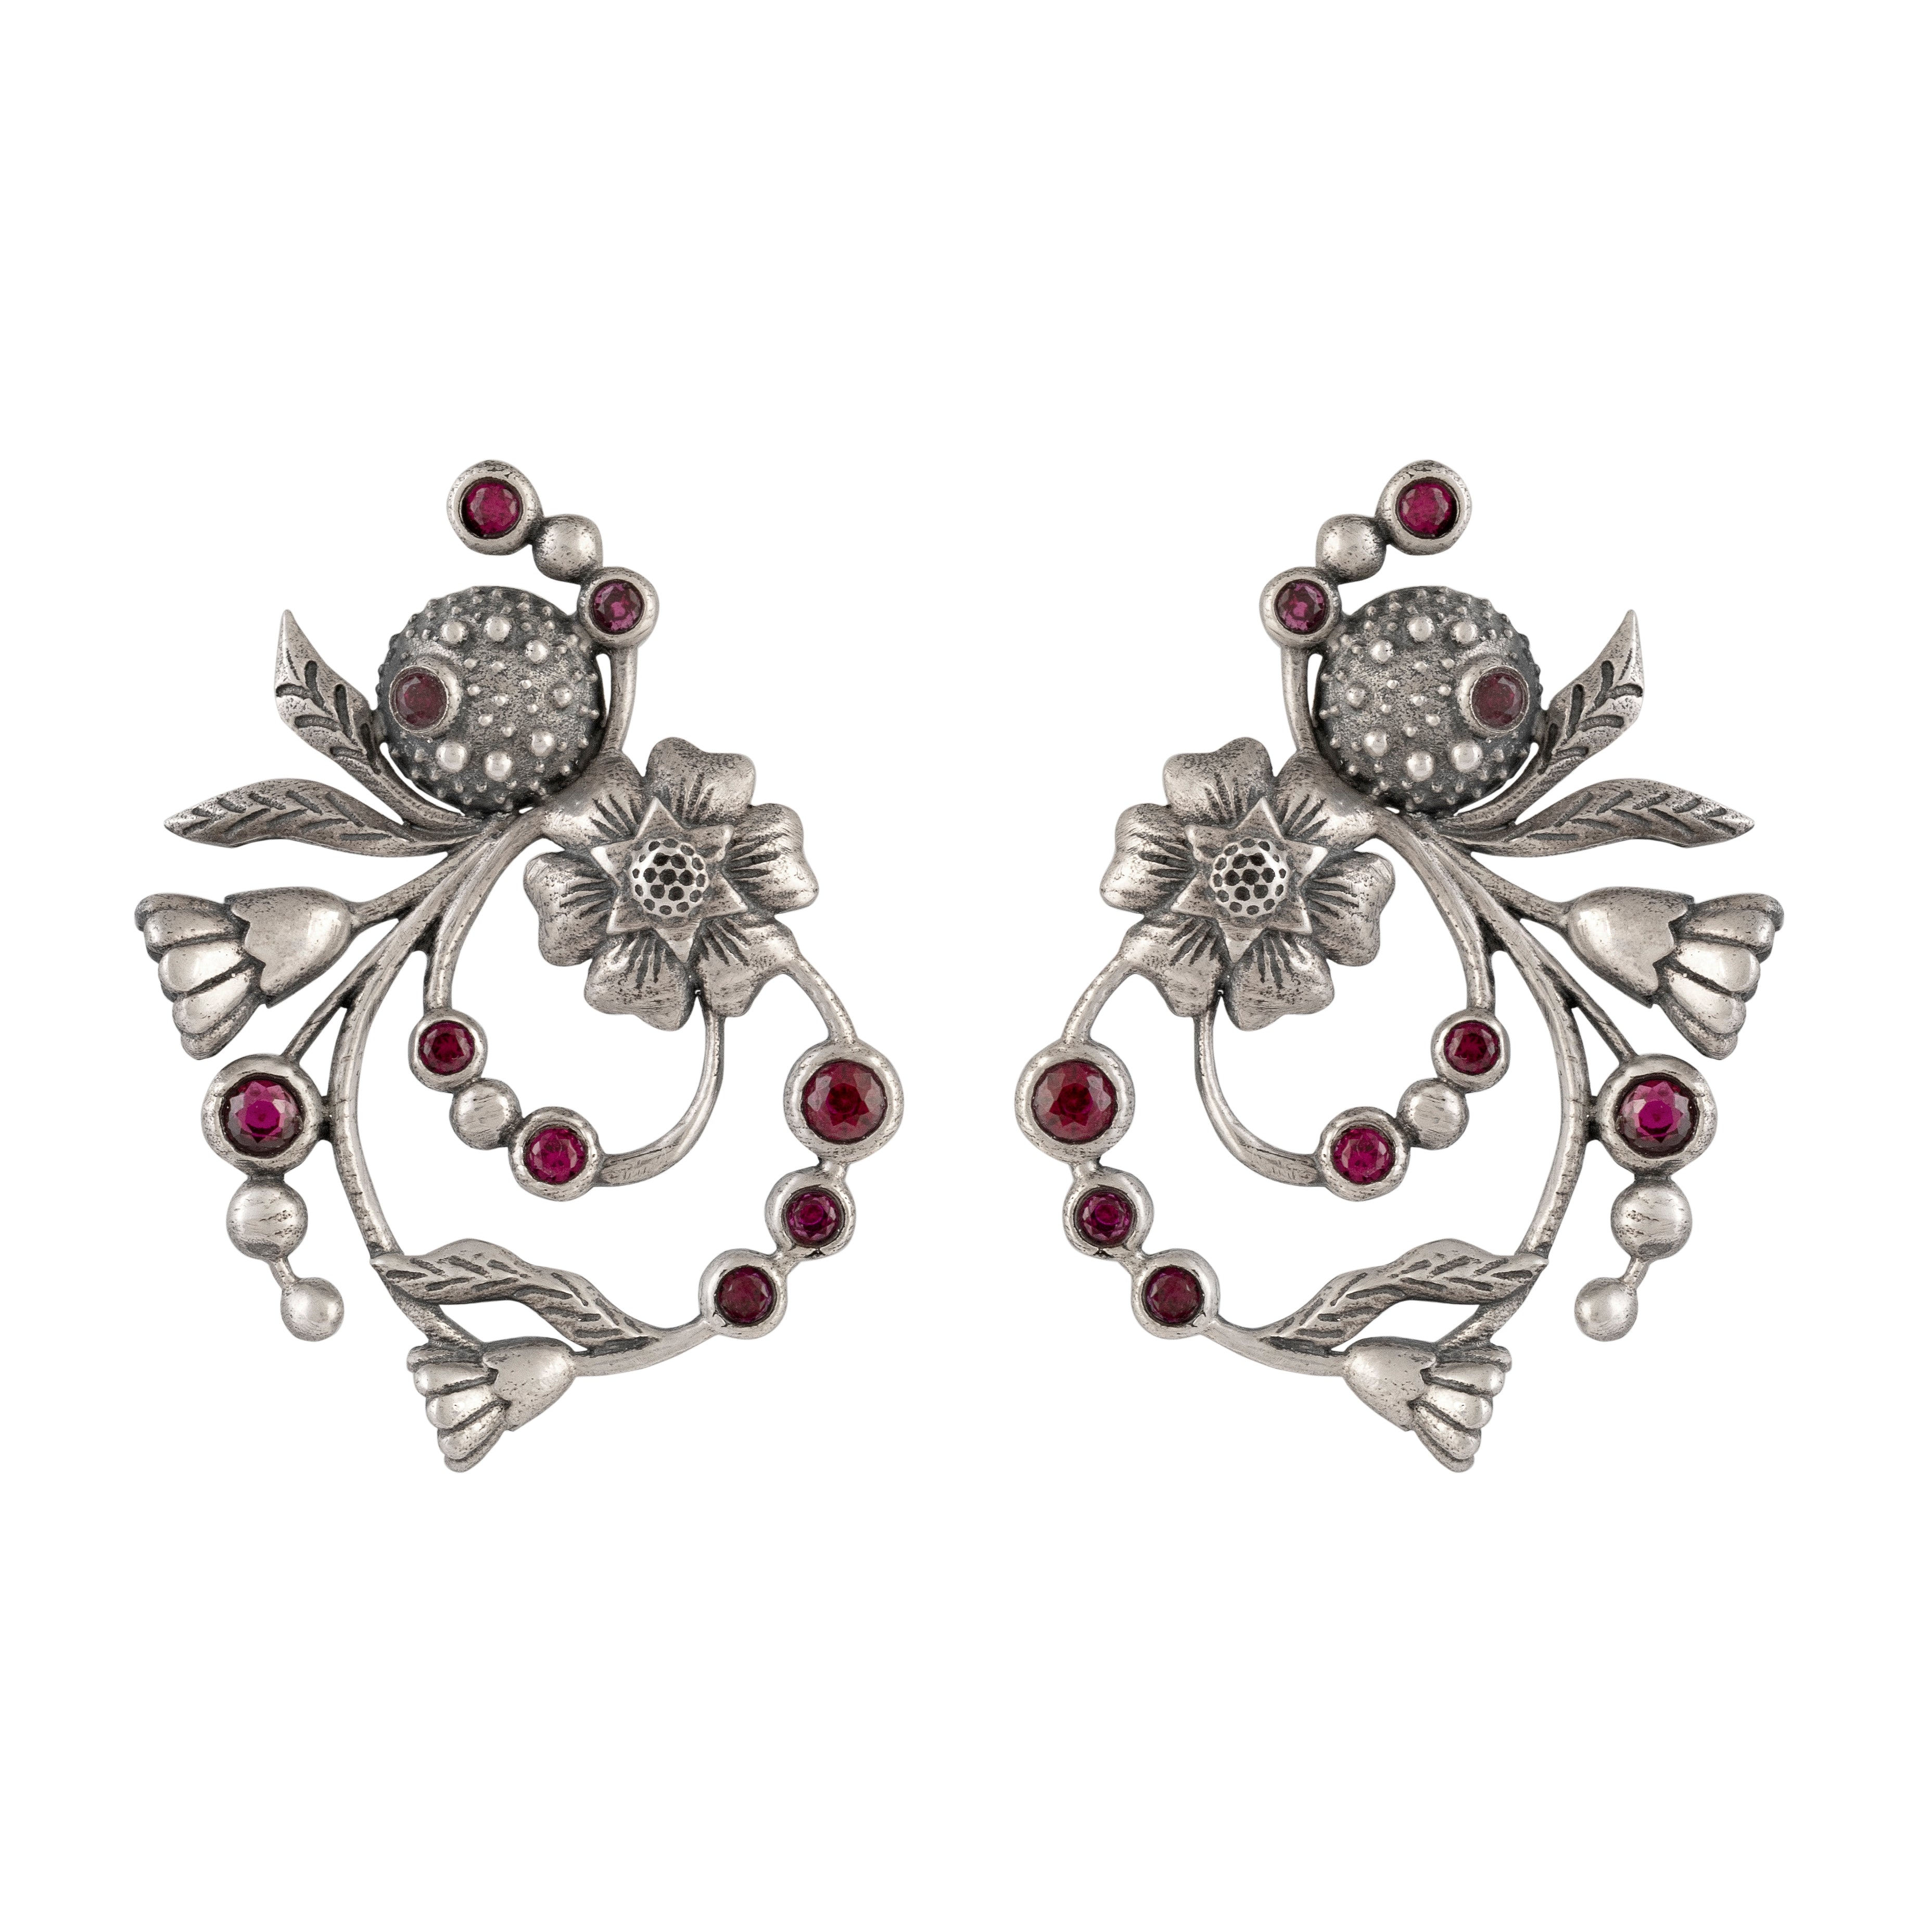 William Morris - Blossom Silver Circle Earrings by Moha